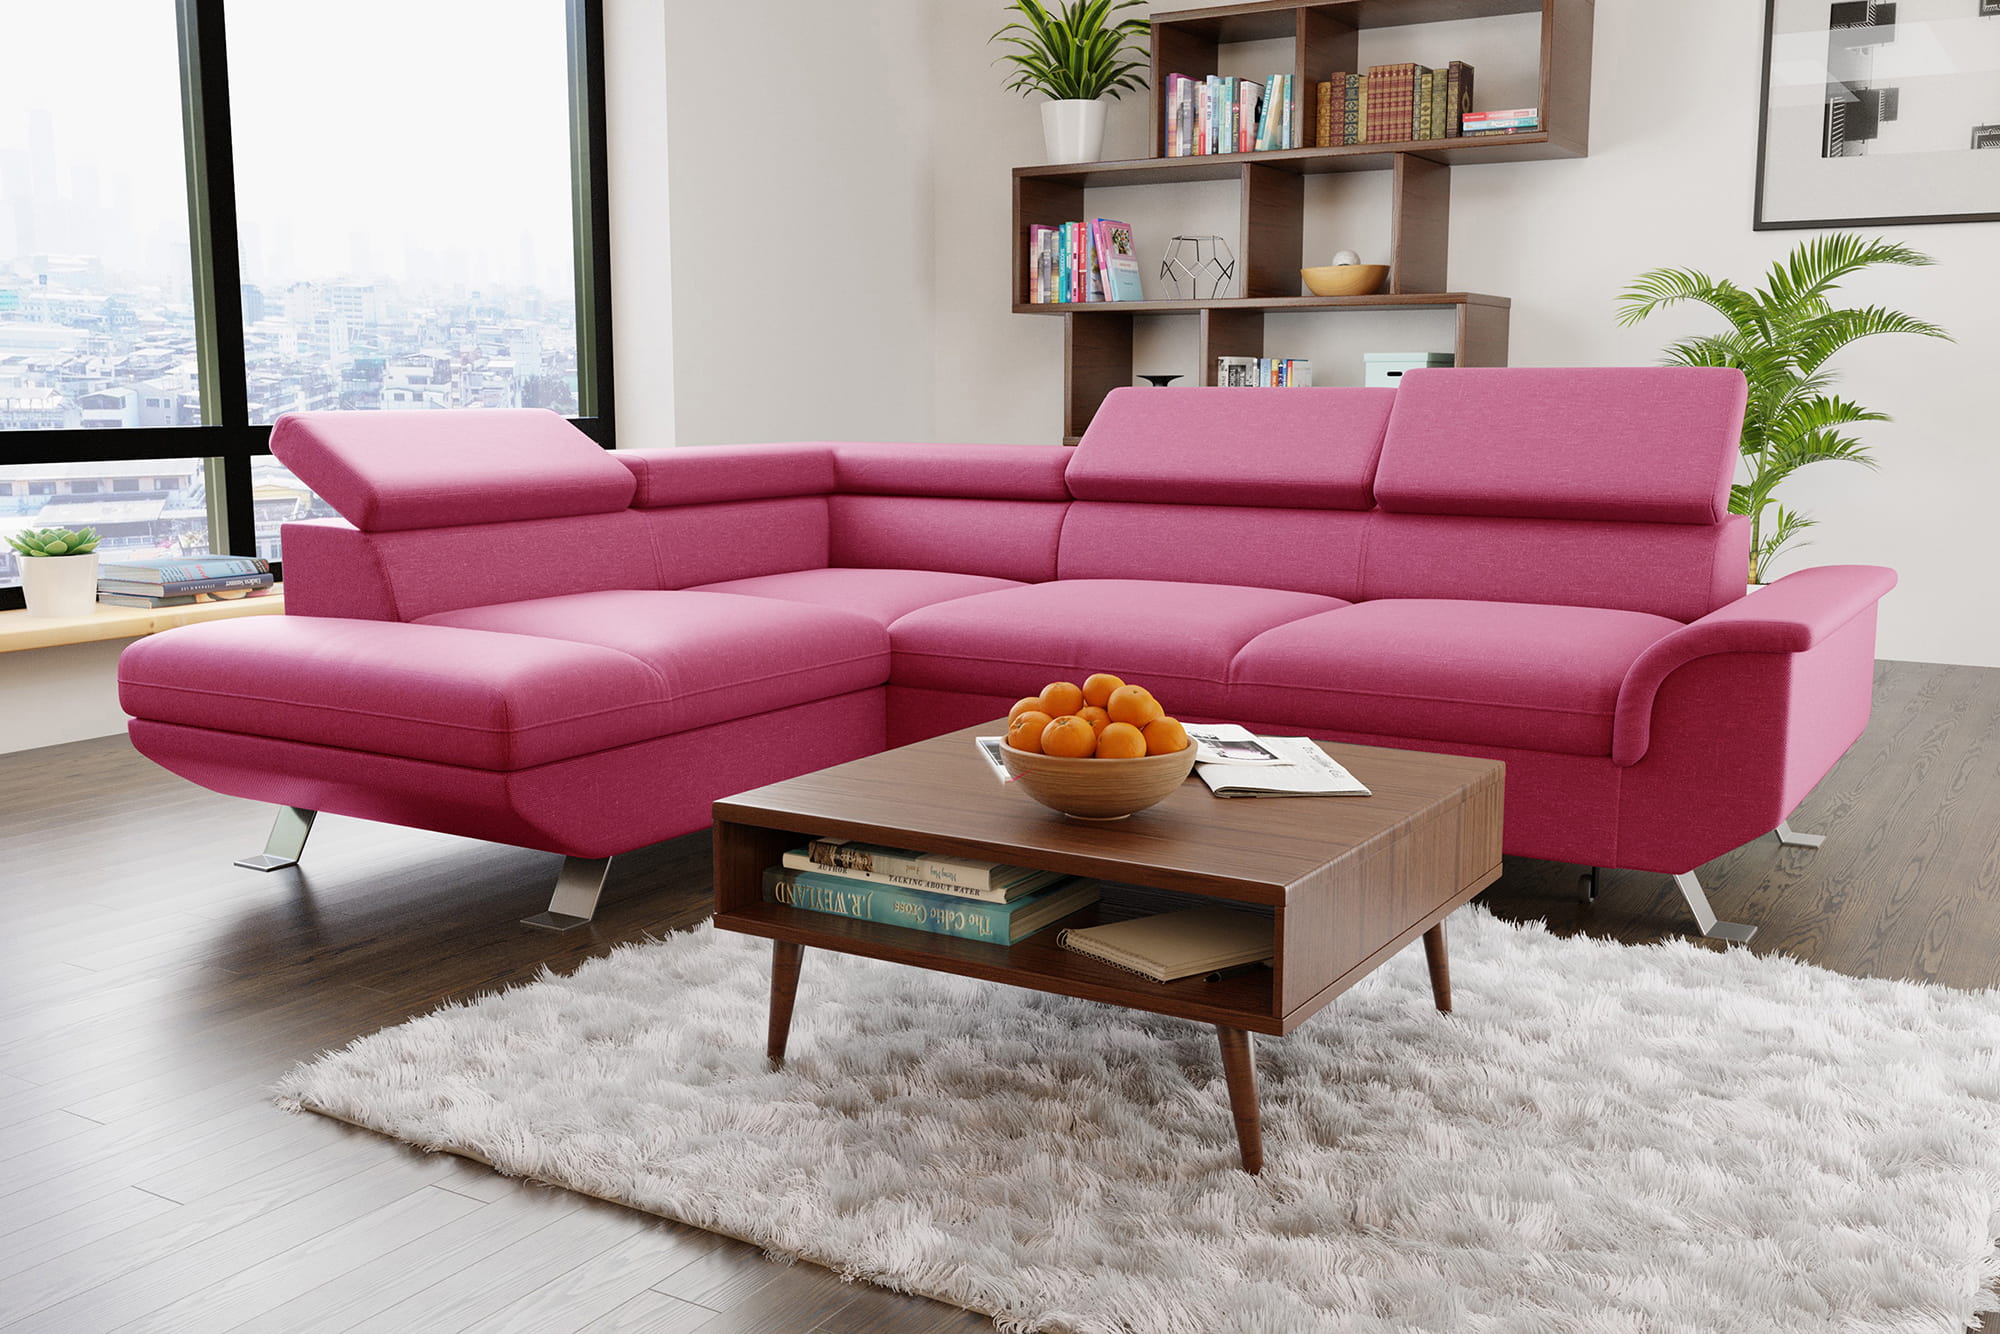 Fuchsia - color of home decorations